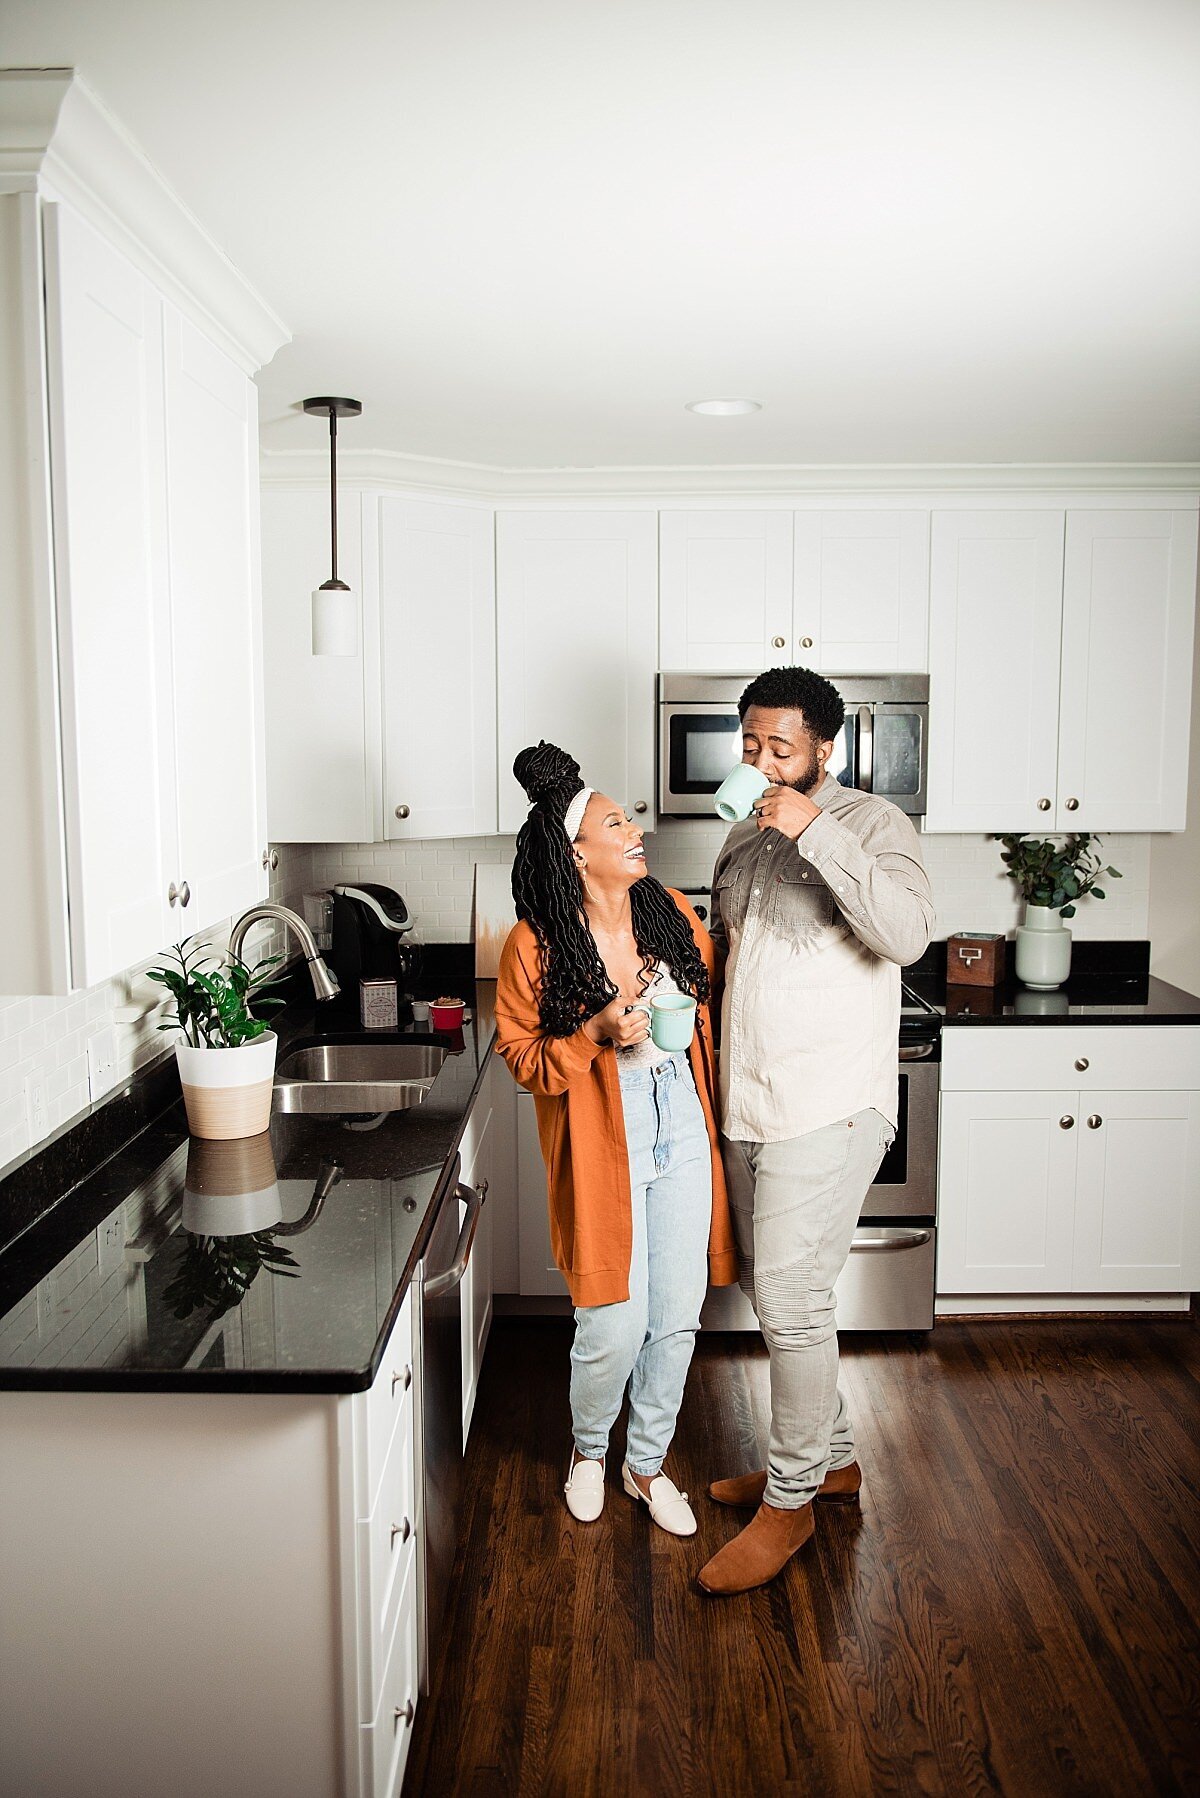 Couple standing in white, grey and black kitchen drinking coffee together.